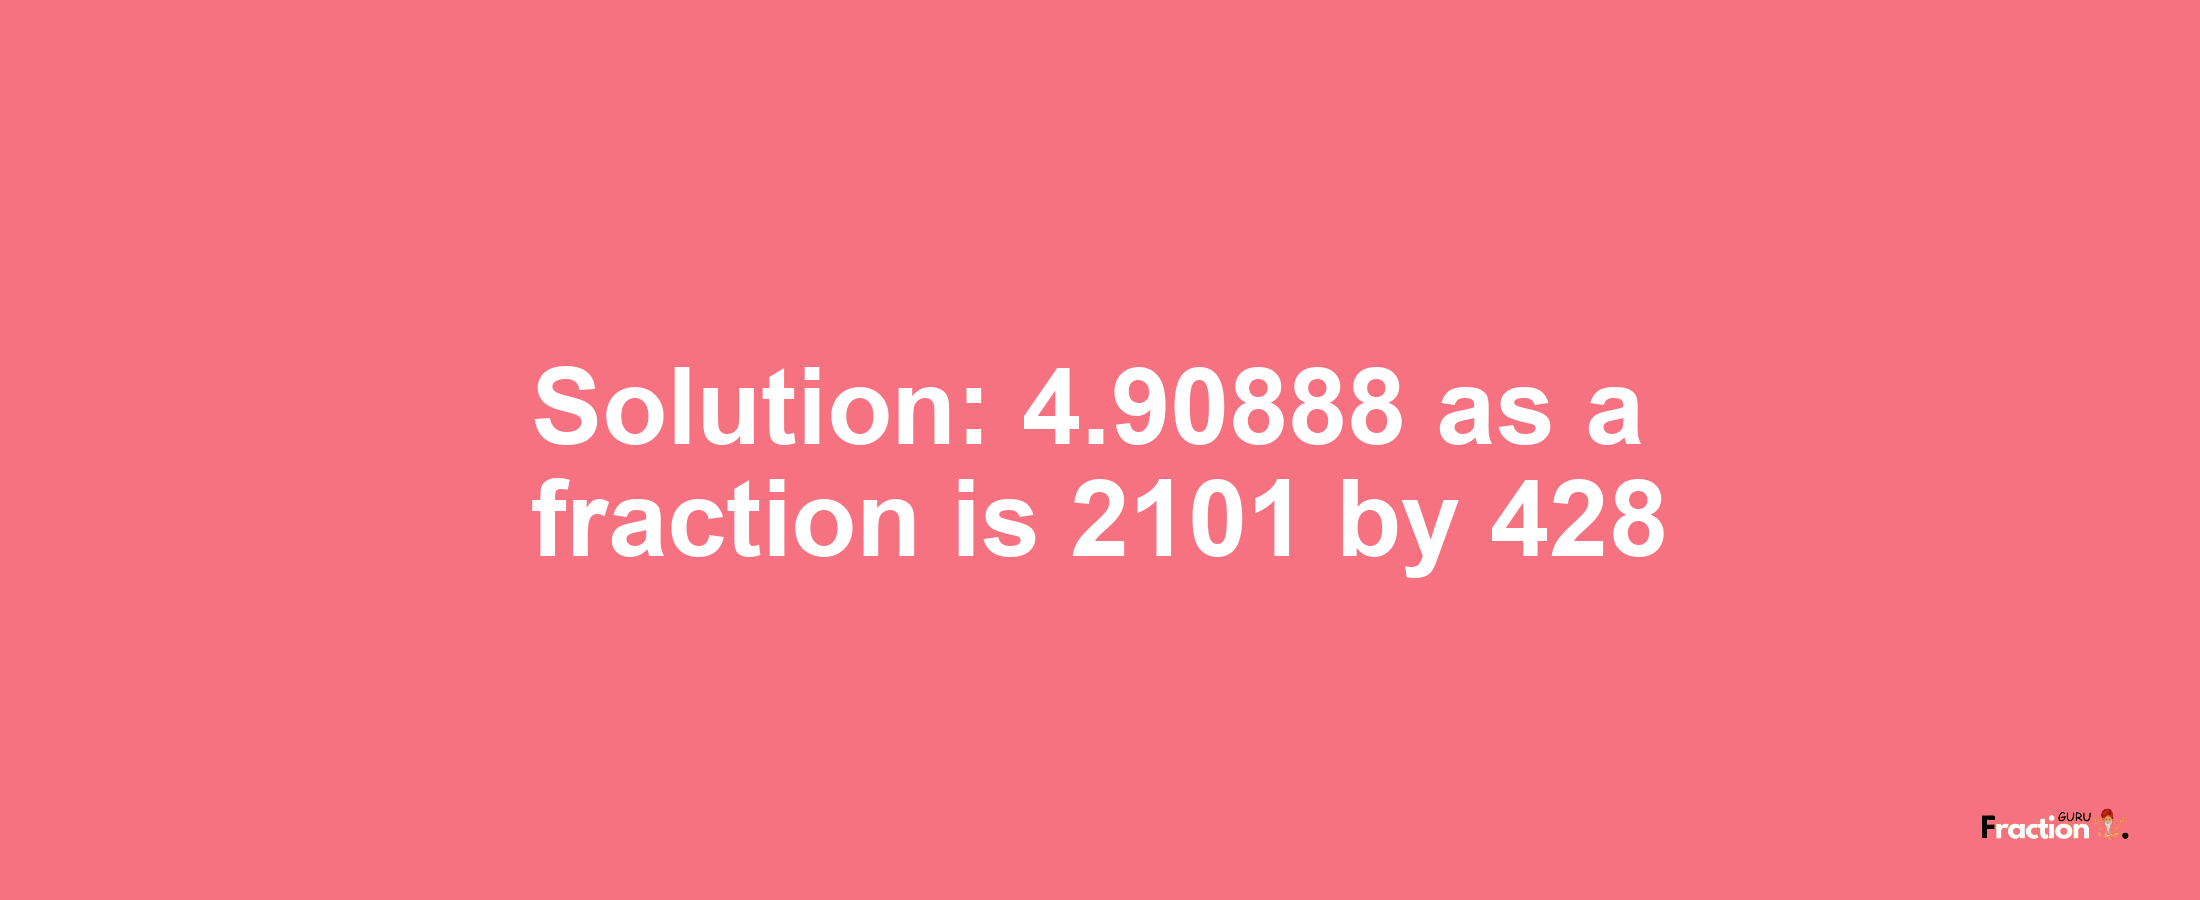 Solution:4.90888 as a fraction is 2101/428